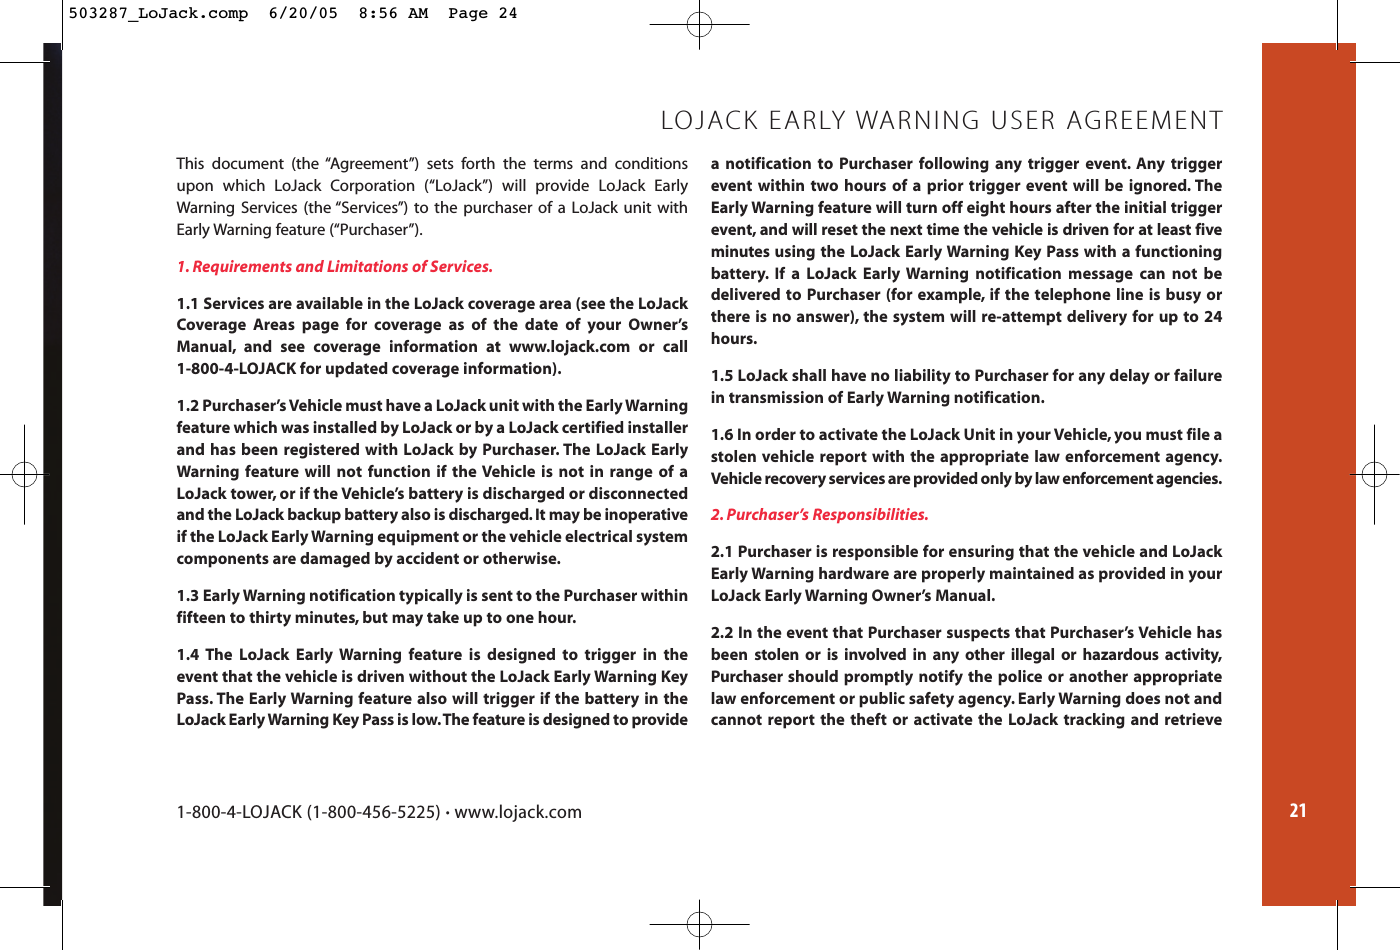 21This document (the “Agreement”) sets forth the terms and conditionsupon which LoJack Corporation (“LoJack”) will provide LoJack EarlyWarning Services (the “Services”) to the purchaser of a LoJack unit withEarly Warning feature (“Purchaser”).1. Requirements and Limitations of Services.1.1 Services are available in the LoJack coverage area (see the LoJackCoverage Areas page for coverage as of the date of your Owner’sManual, and see coverage information at www.lojack.com or call 1-800-4-LOJACK for updated coverage information).1.2 Purchaser’s Vehicle must have a LoJack unit with the Early Warningfeature which was installed by LoJack or by a LoJack certified installerand has been registered with LoJack by Purchaser. The LoJack EarlyWarning feature will not function if the Vehicle is not in range of aLoJack tower, or if the Vehicle’s battery is discharged or disconnectedand the LoJack backup battery also is discharged. It may be inoperativeif the LoJack Early Warning equipment or the vehicle electrical systemcomponents are damaged by accident or otherwise.1.3 Early Warning notification typically is sent to the Purchaser within fifteen to thirty minutes, but may take up to one hour.1.4 The LoJack Early Warning feature is designed to trigger in theevent that the vehicle is driven without the LoJack Early Warning KeyPass. The Early Warning feature also will trigger if the battery in theLoJack Early Warning Key Pass is low.The feature is designed to providea notification to Purchaser following any trigger event. Any triggerevent within two hours of a prior trigger event will be ignored. TheEarly Warning feature will turn off eight hours after the initial triggerevent, and will reset the next time the vehicle is driven for at least fiveminutes using the LoJack Early Warning Key Pass with a functioningbattery. If a LoJack Early Warning notification message can not bedelivered to Purchaser (for example, if the telephone line is busy orthere is no answer), the system will re-attempt delivery for up to 24hours.1.5 LoJack shall have no liability to Purchaser for any delay or failurein transmission of Early Warning notification.1.6 In order to activate the LoJack Unit in your Vehicle, you must file astolen vehicle report with the appropriate law enforcement agency.Vehicle recovery services are provided only by law enforcement agencies.2. Purchaser’s Responsibilities.2.1 Purchaser is responsible for ensuring that the vehicle and LoJackEarly Warning hardware are properly maintained as provided in yourLoJack Early Warning Owner’s Manual.2.2 In the event that Purchaser suspects that Purchaser’s Vehicle has been stolen or is involved in any other illegal or hazardous activity,Purchaser should promptly notify the police or another appropriatelaw enforcement or public safety agency. Early Warning does not and cannot report the theft or activate the LoJack tracking and retrieveLOJACK EARLY WARNING USER AGREEMENT1-800-4-LOJACK (1-800-456-5225) •www.lojack.com503287_LoJack.comp  6/20/05  8:56 AM  Page 24